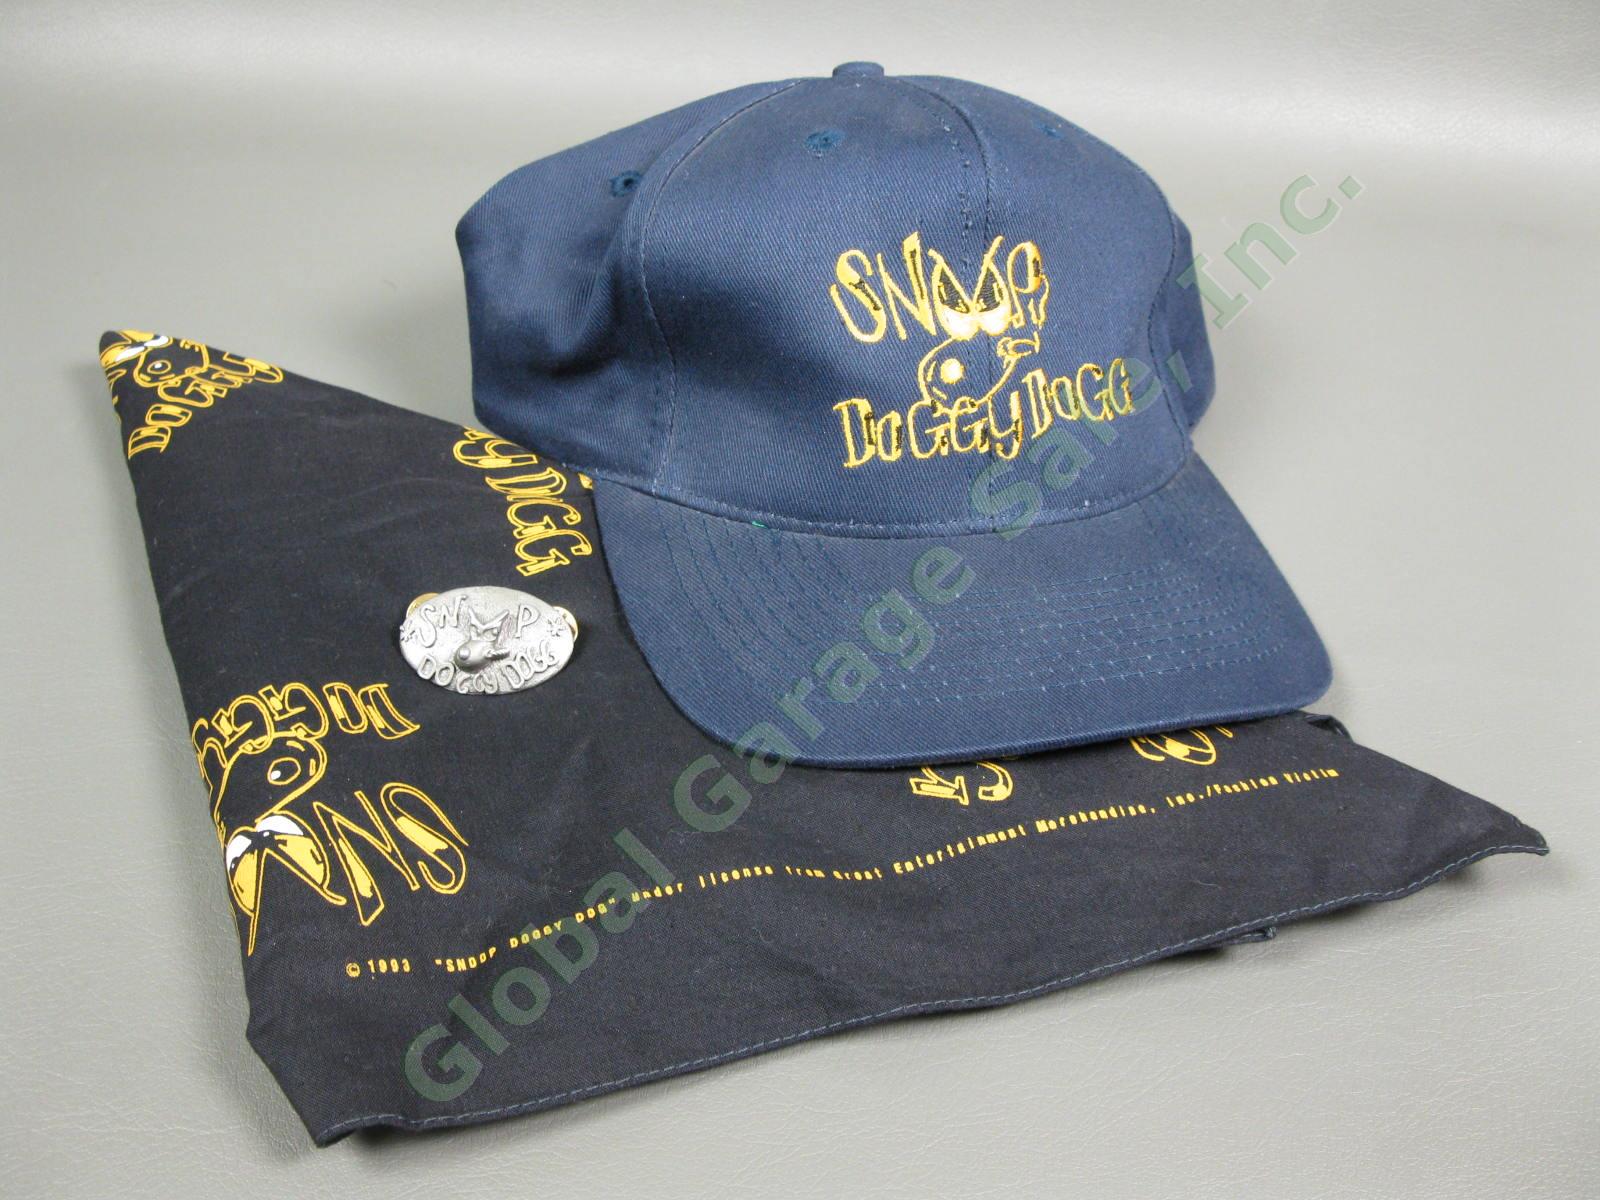 Authentic 1993 Snoop Dogg Doggy Style Debut Apparel Set Pin Do Rag Bandana Hat